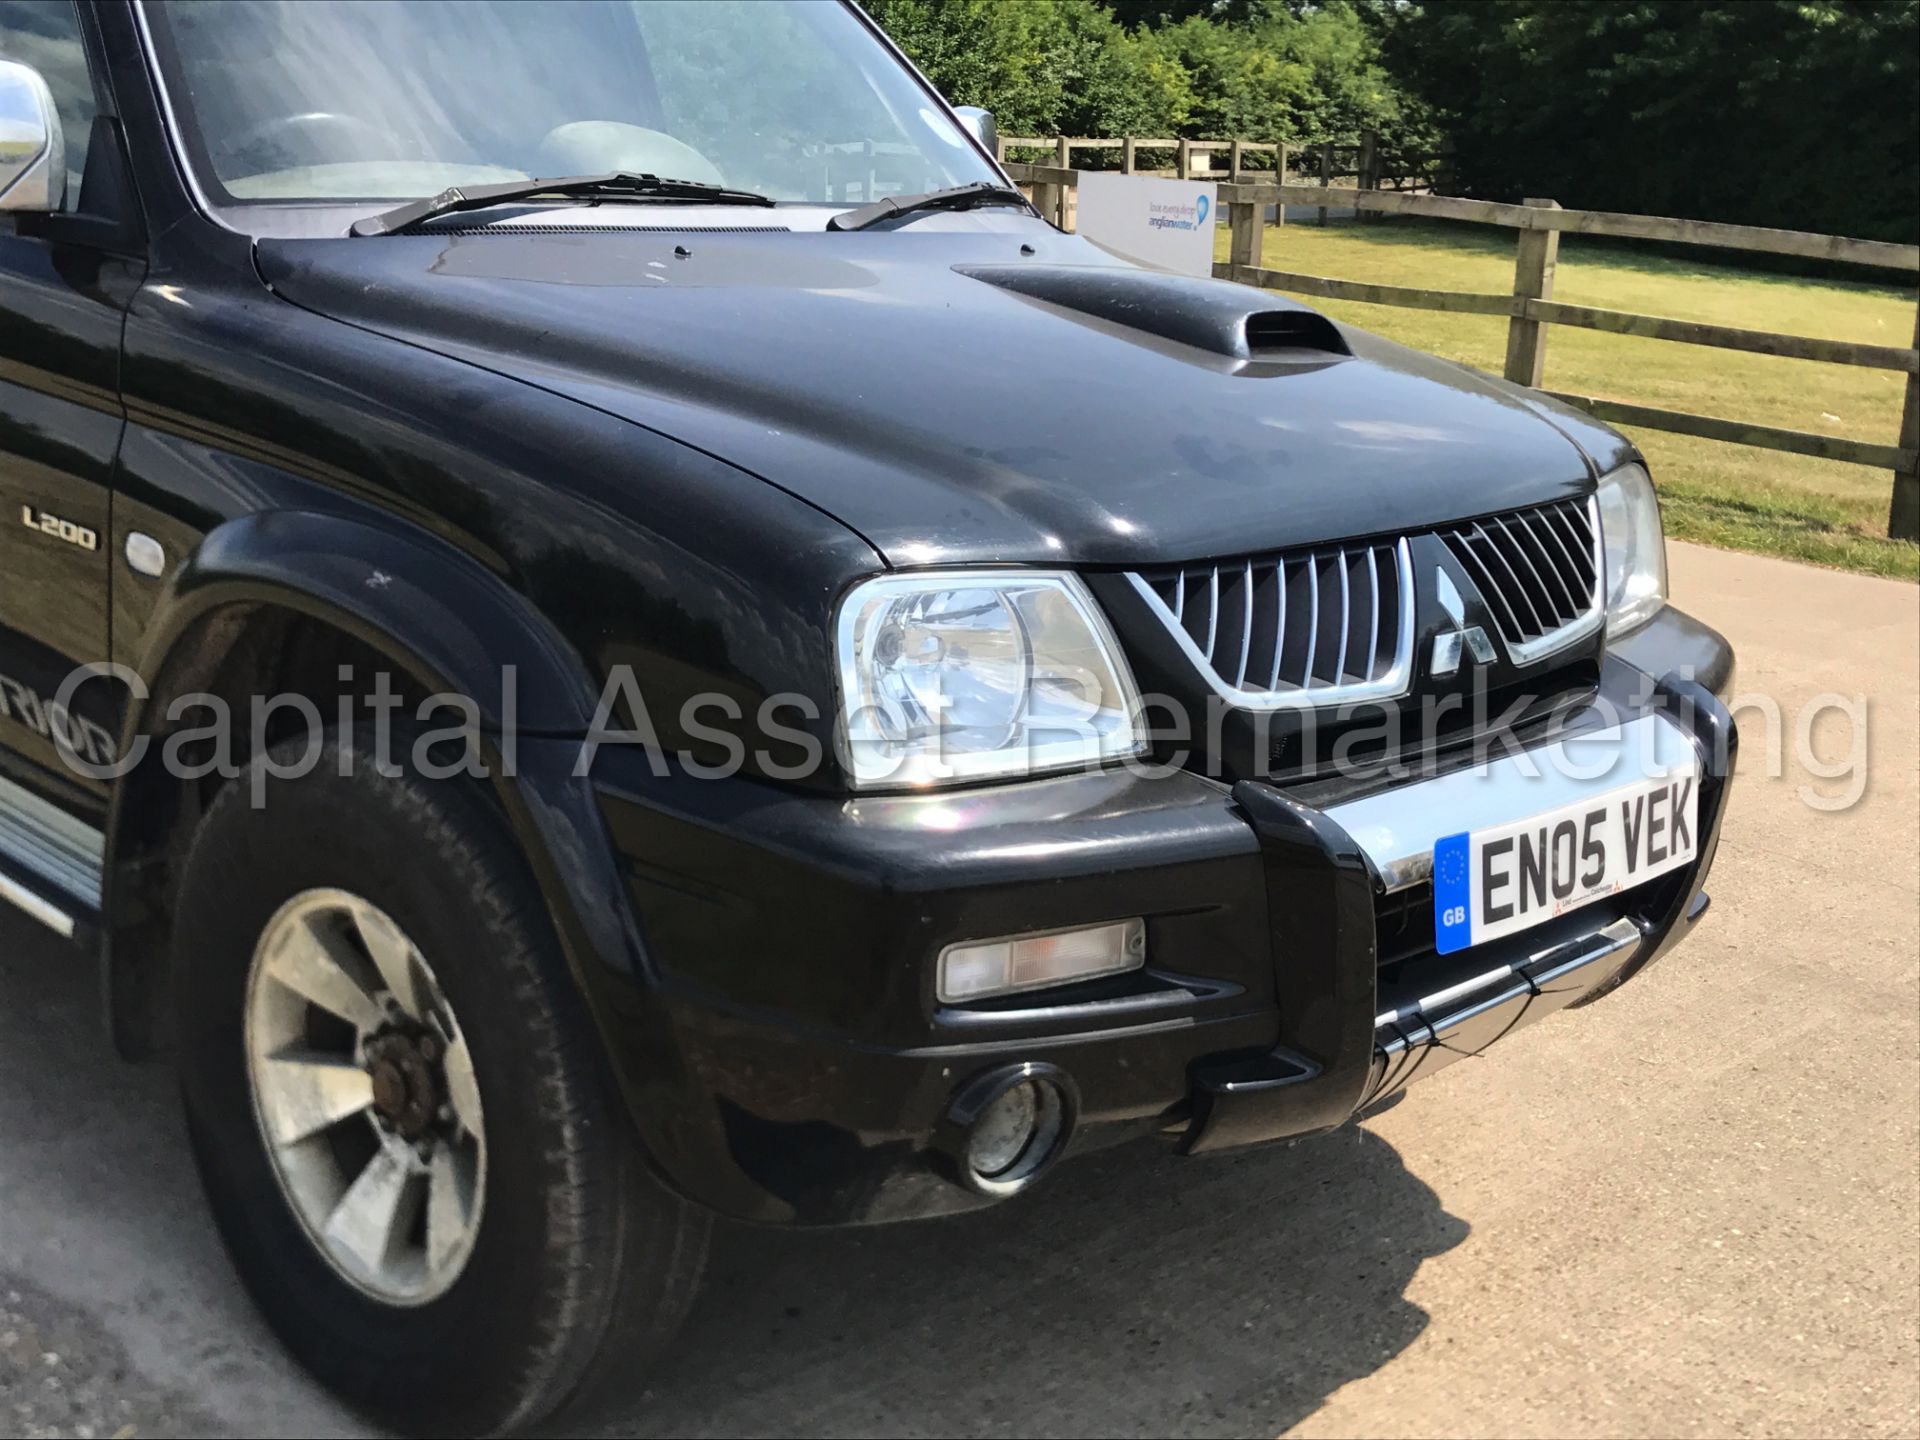 MITSUBISHI L200 'WARRIOR' DOUBLE CAB PICK-UP (2005) '2.5 DIESEL - 5 SPEED - AIR CON' (NO VAT) - Image 11 of 25